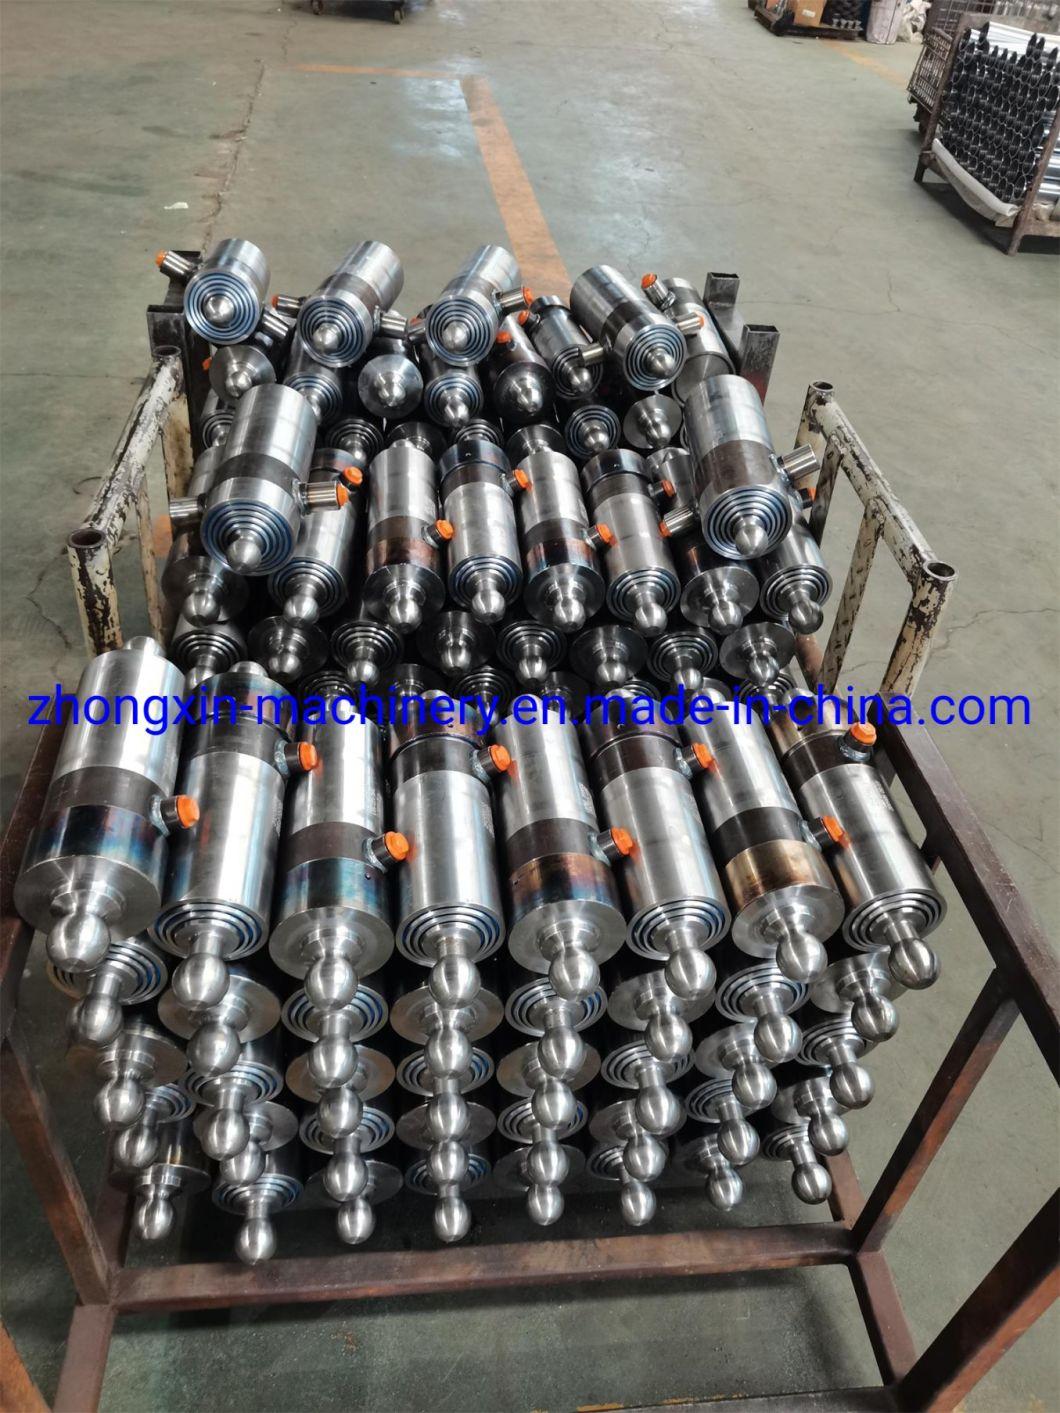 Hydraulic Cylinders Manufacturer Can Lift 8-20tons for Trailers